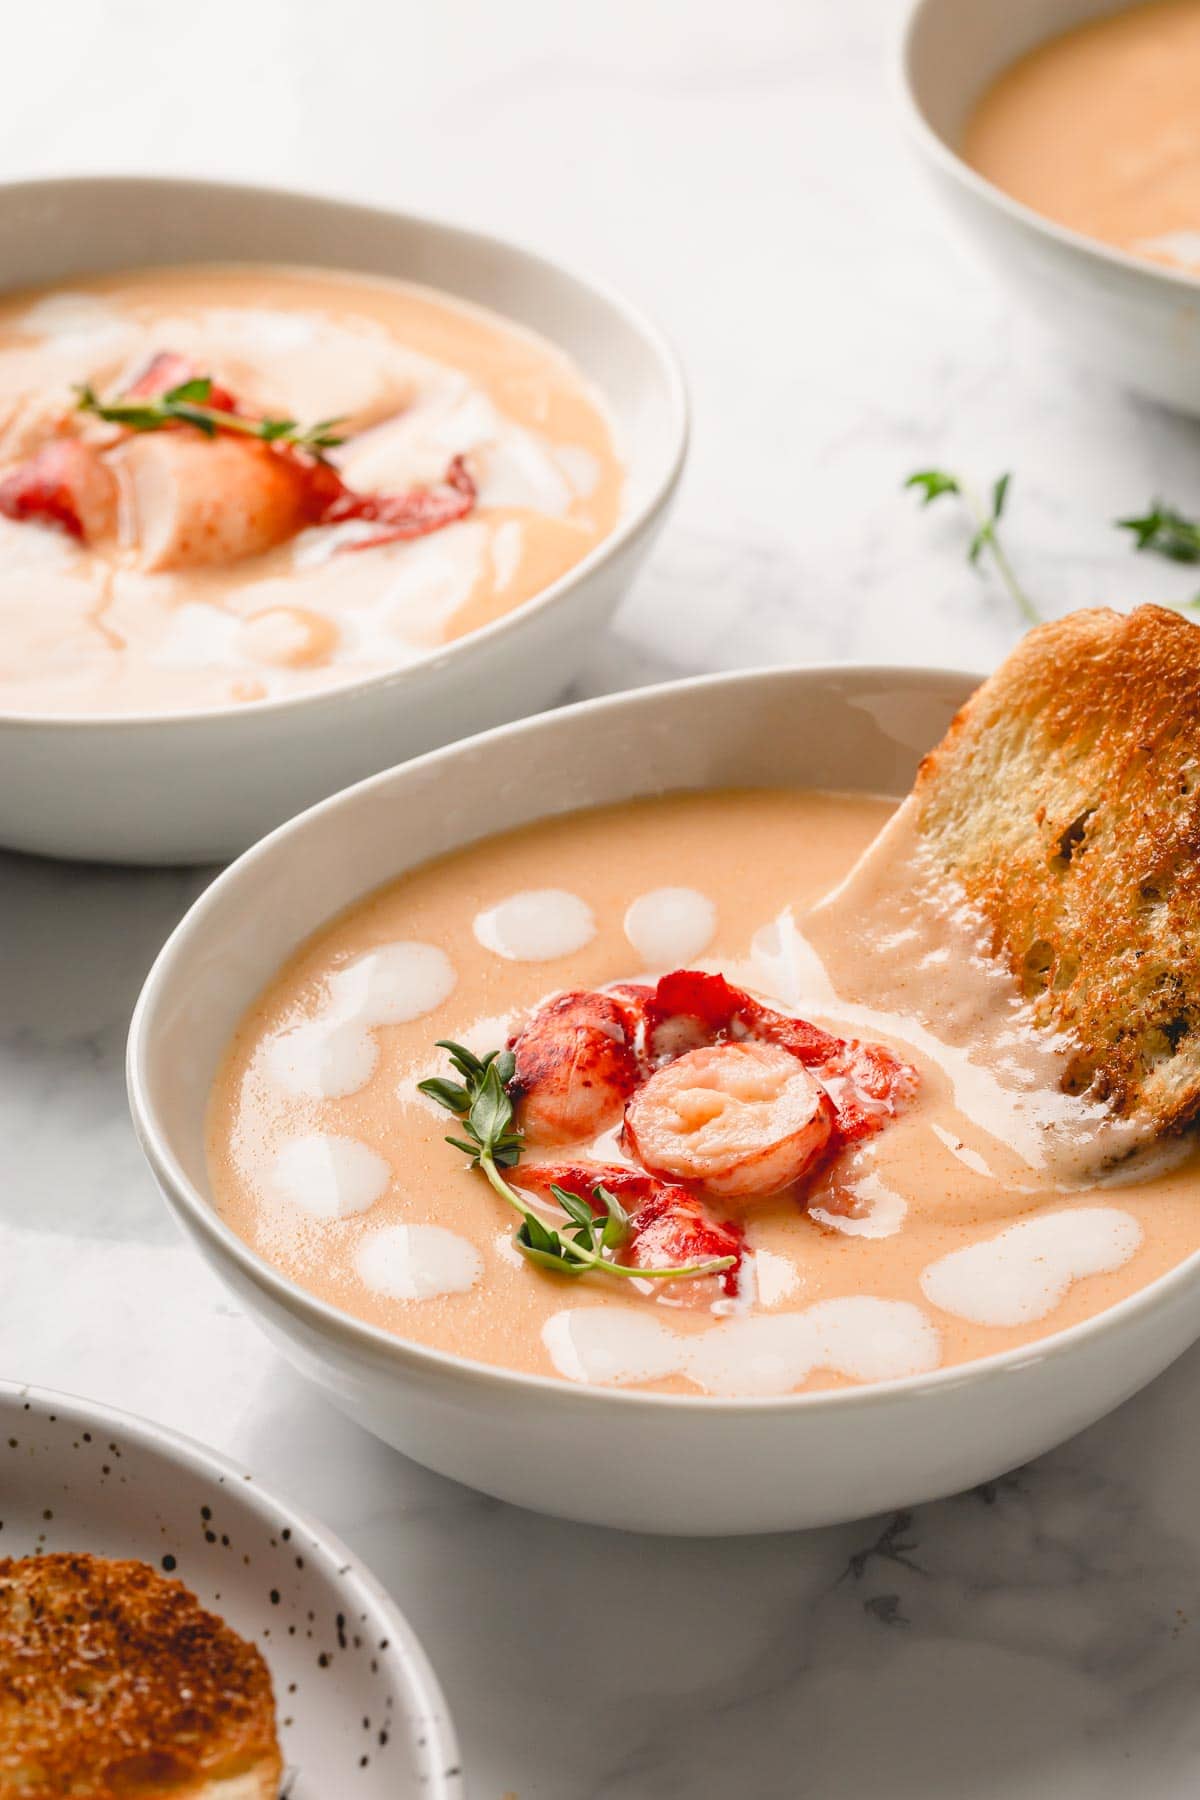 A bowl of lobster bisque garnished with heavy cream, lobster chunks, fresh thyme sprig and a side of toasted bread.